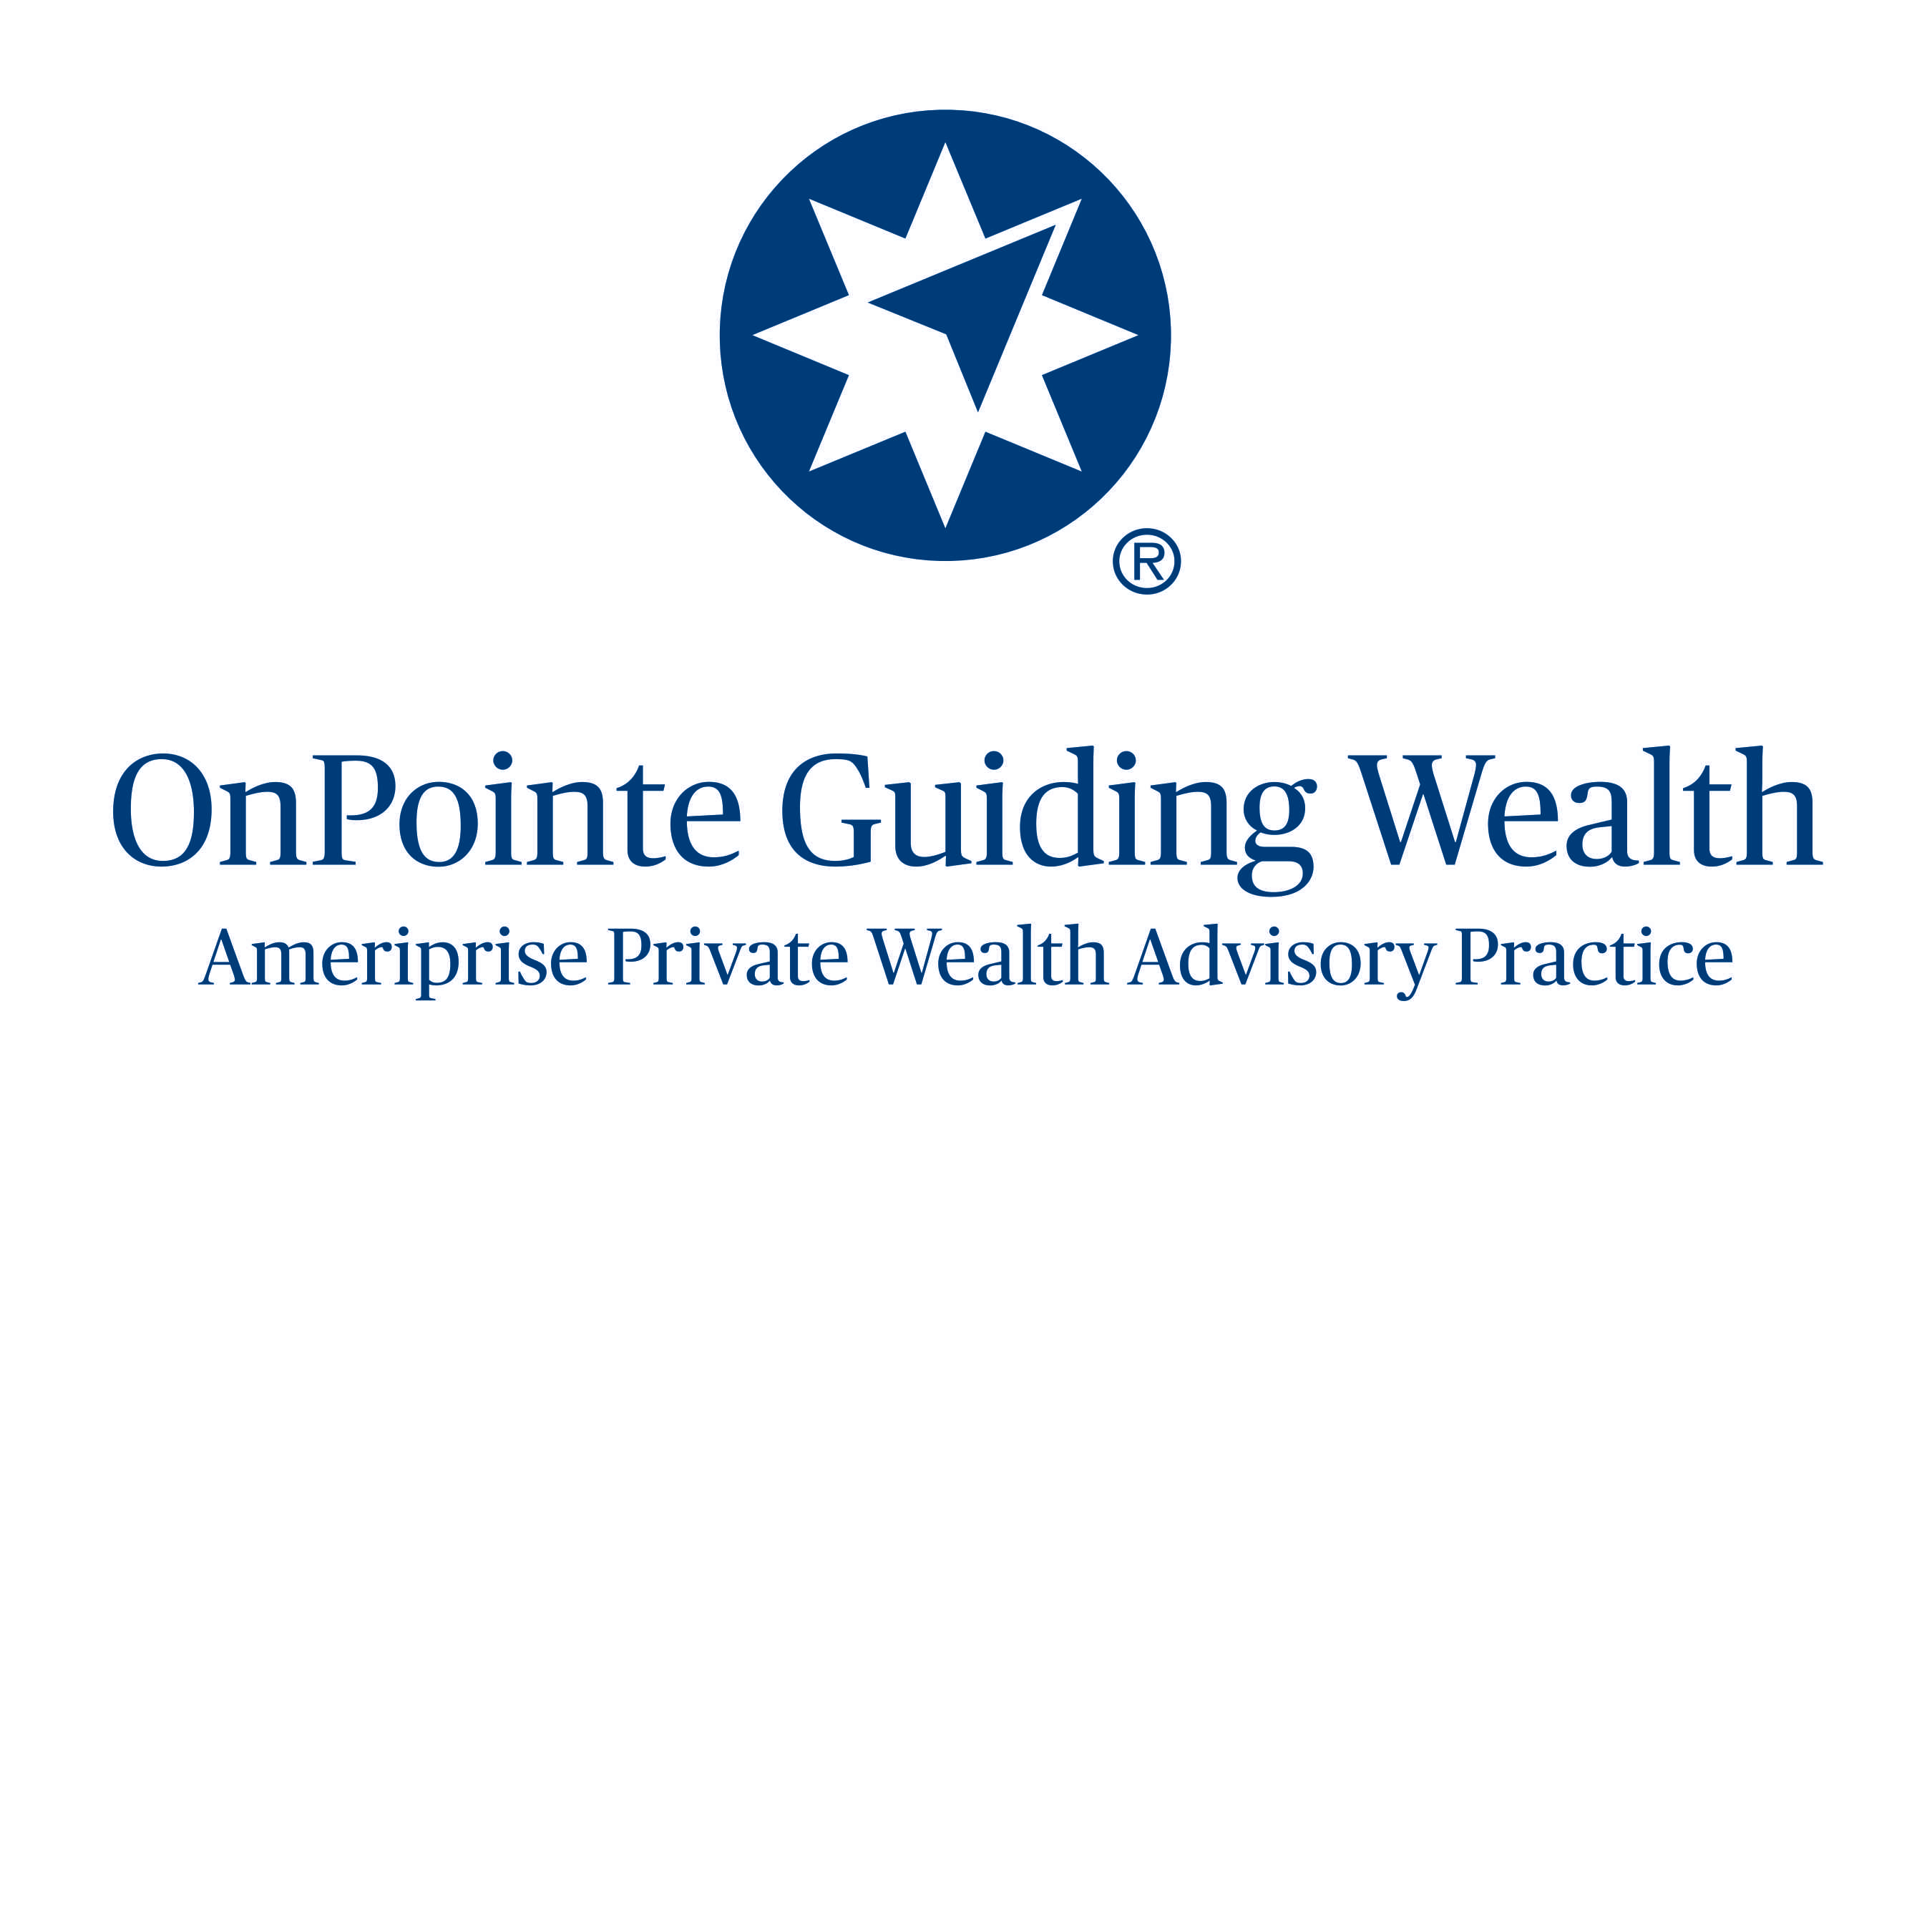 OnPointe Guiding Wealth -Ameriprise